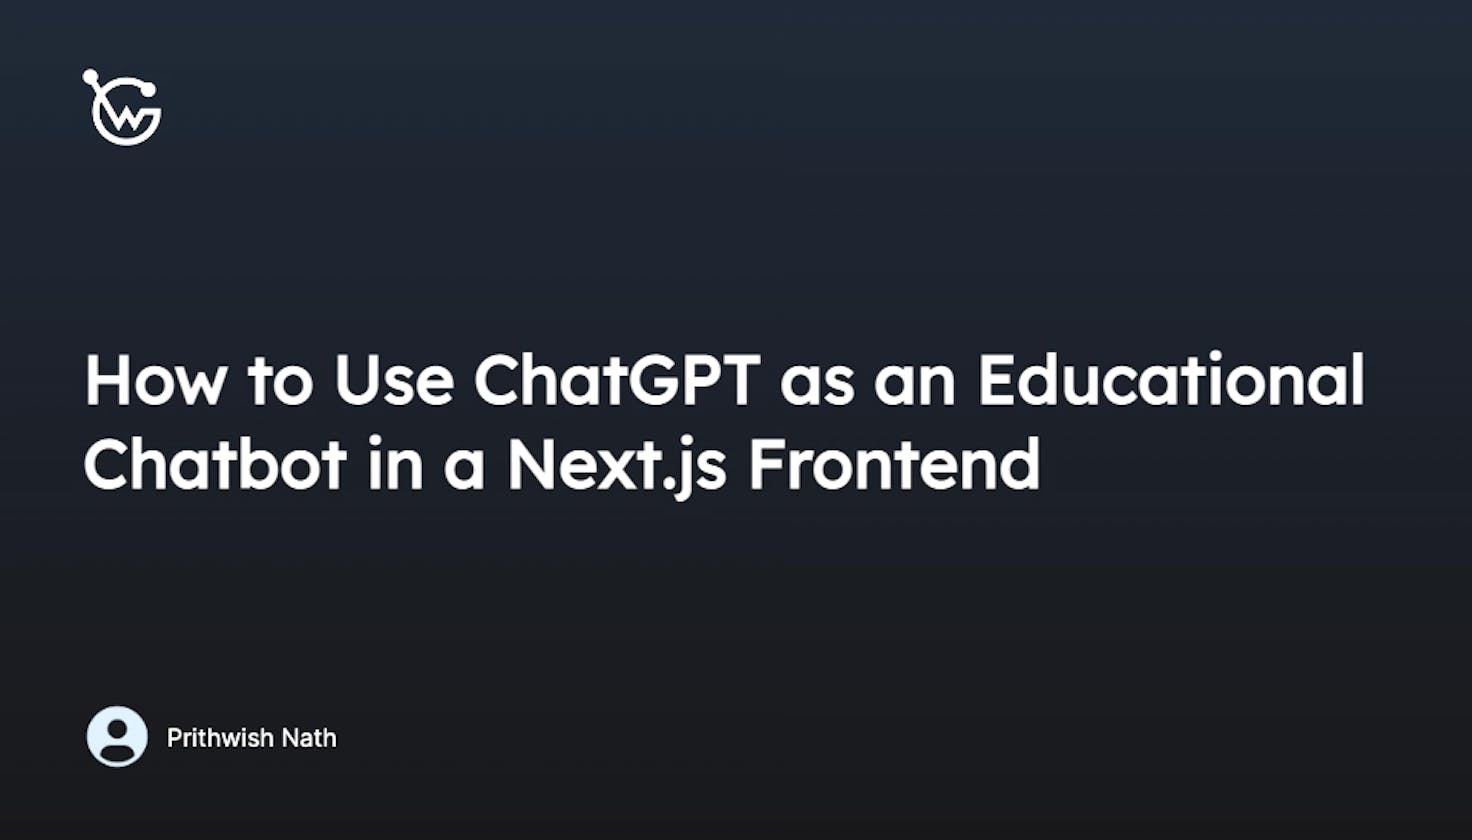 How to Use ChatGPT as an Educational Chatbot in a Next.js Frontend